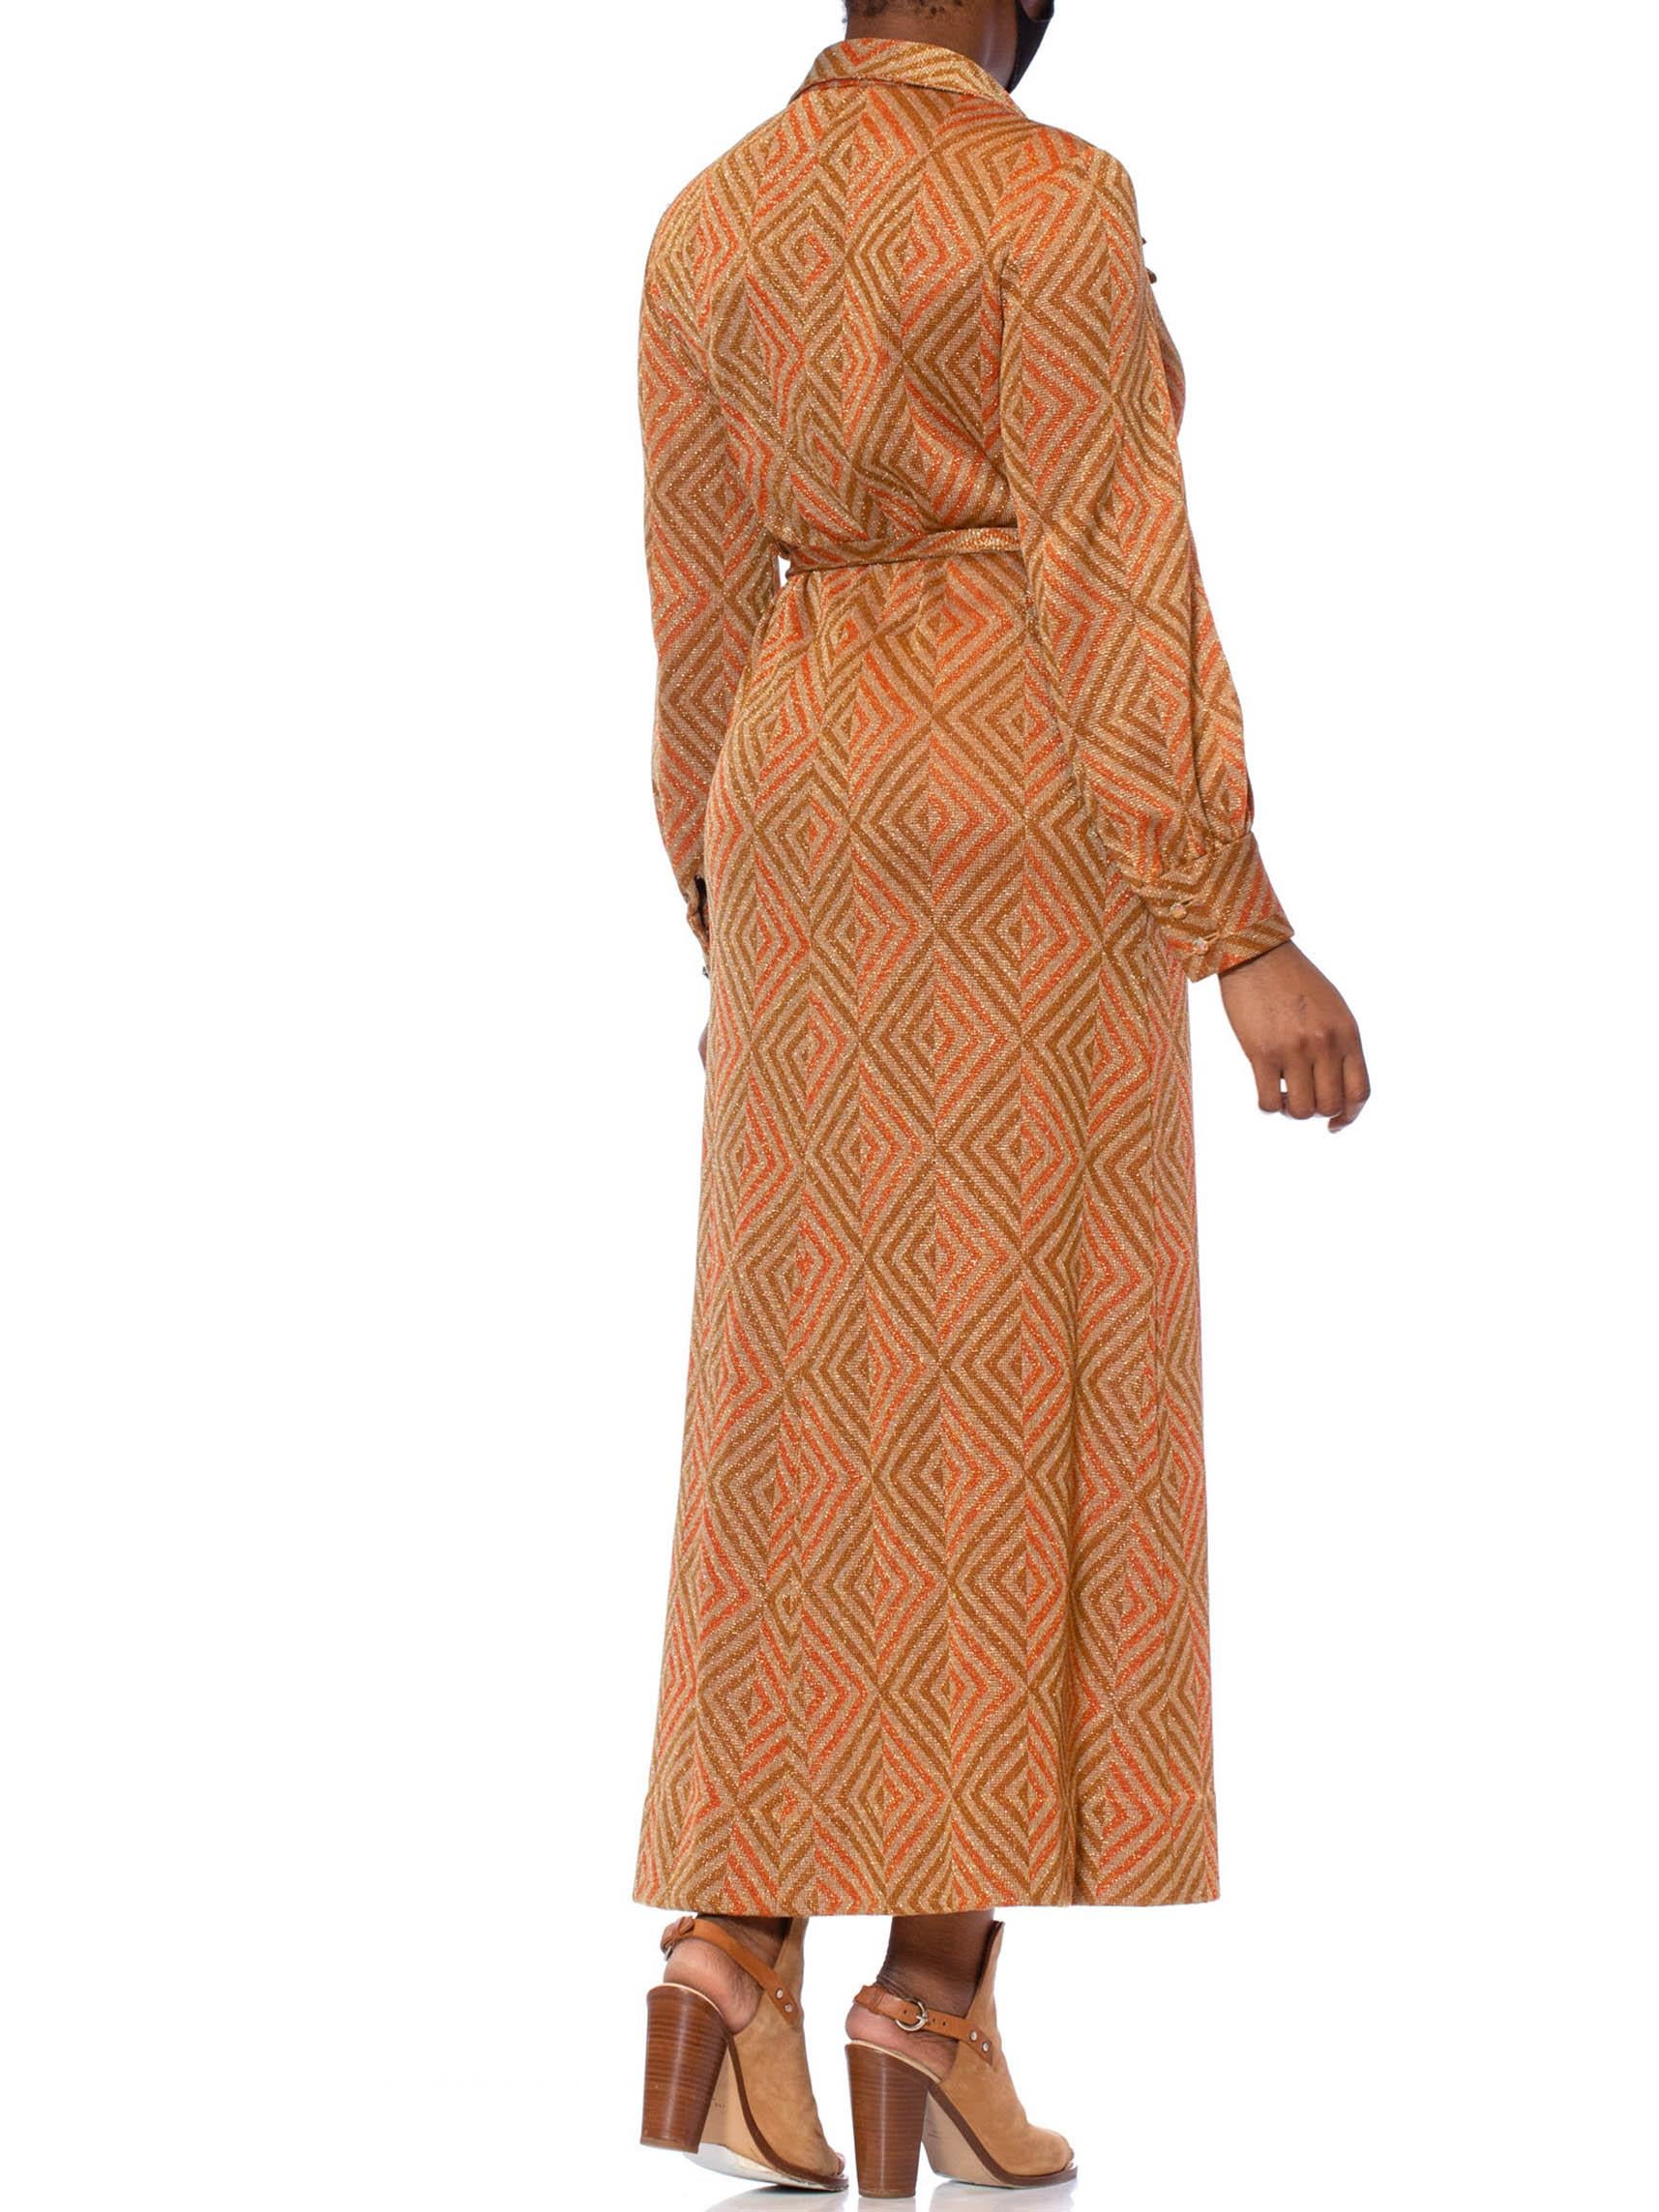 1970S Cinnamon Brown & Orange Poly/Lurex Double Knit Long Sleeved Maxi Cocktail 5